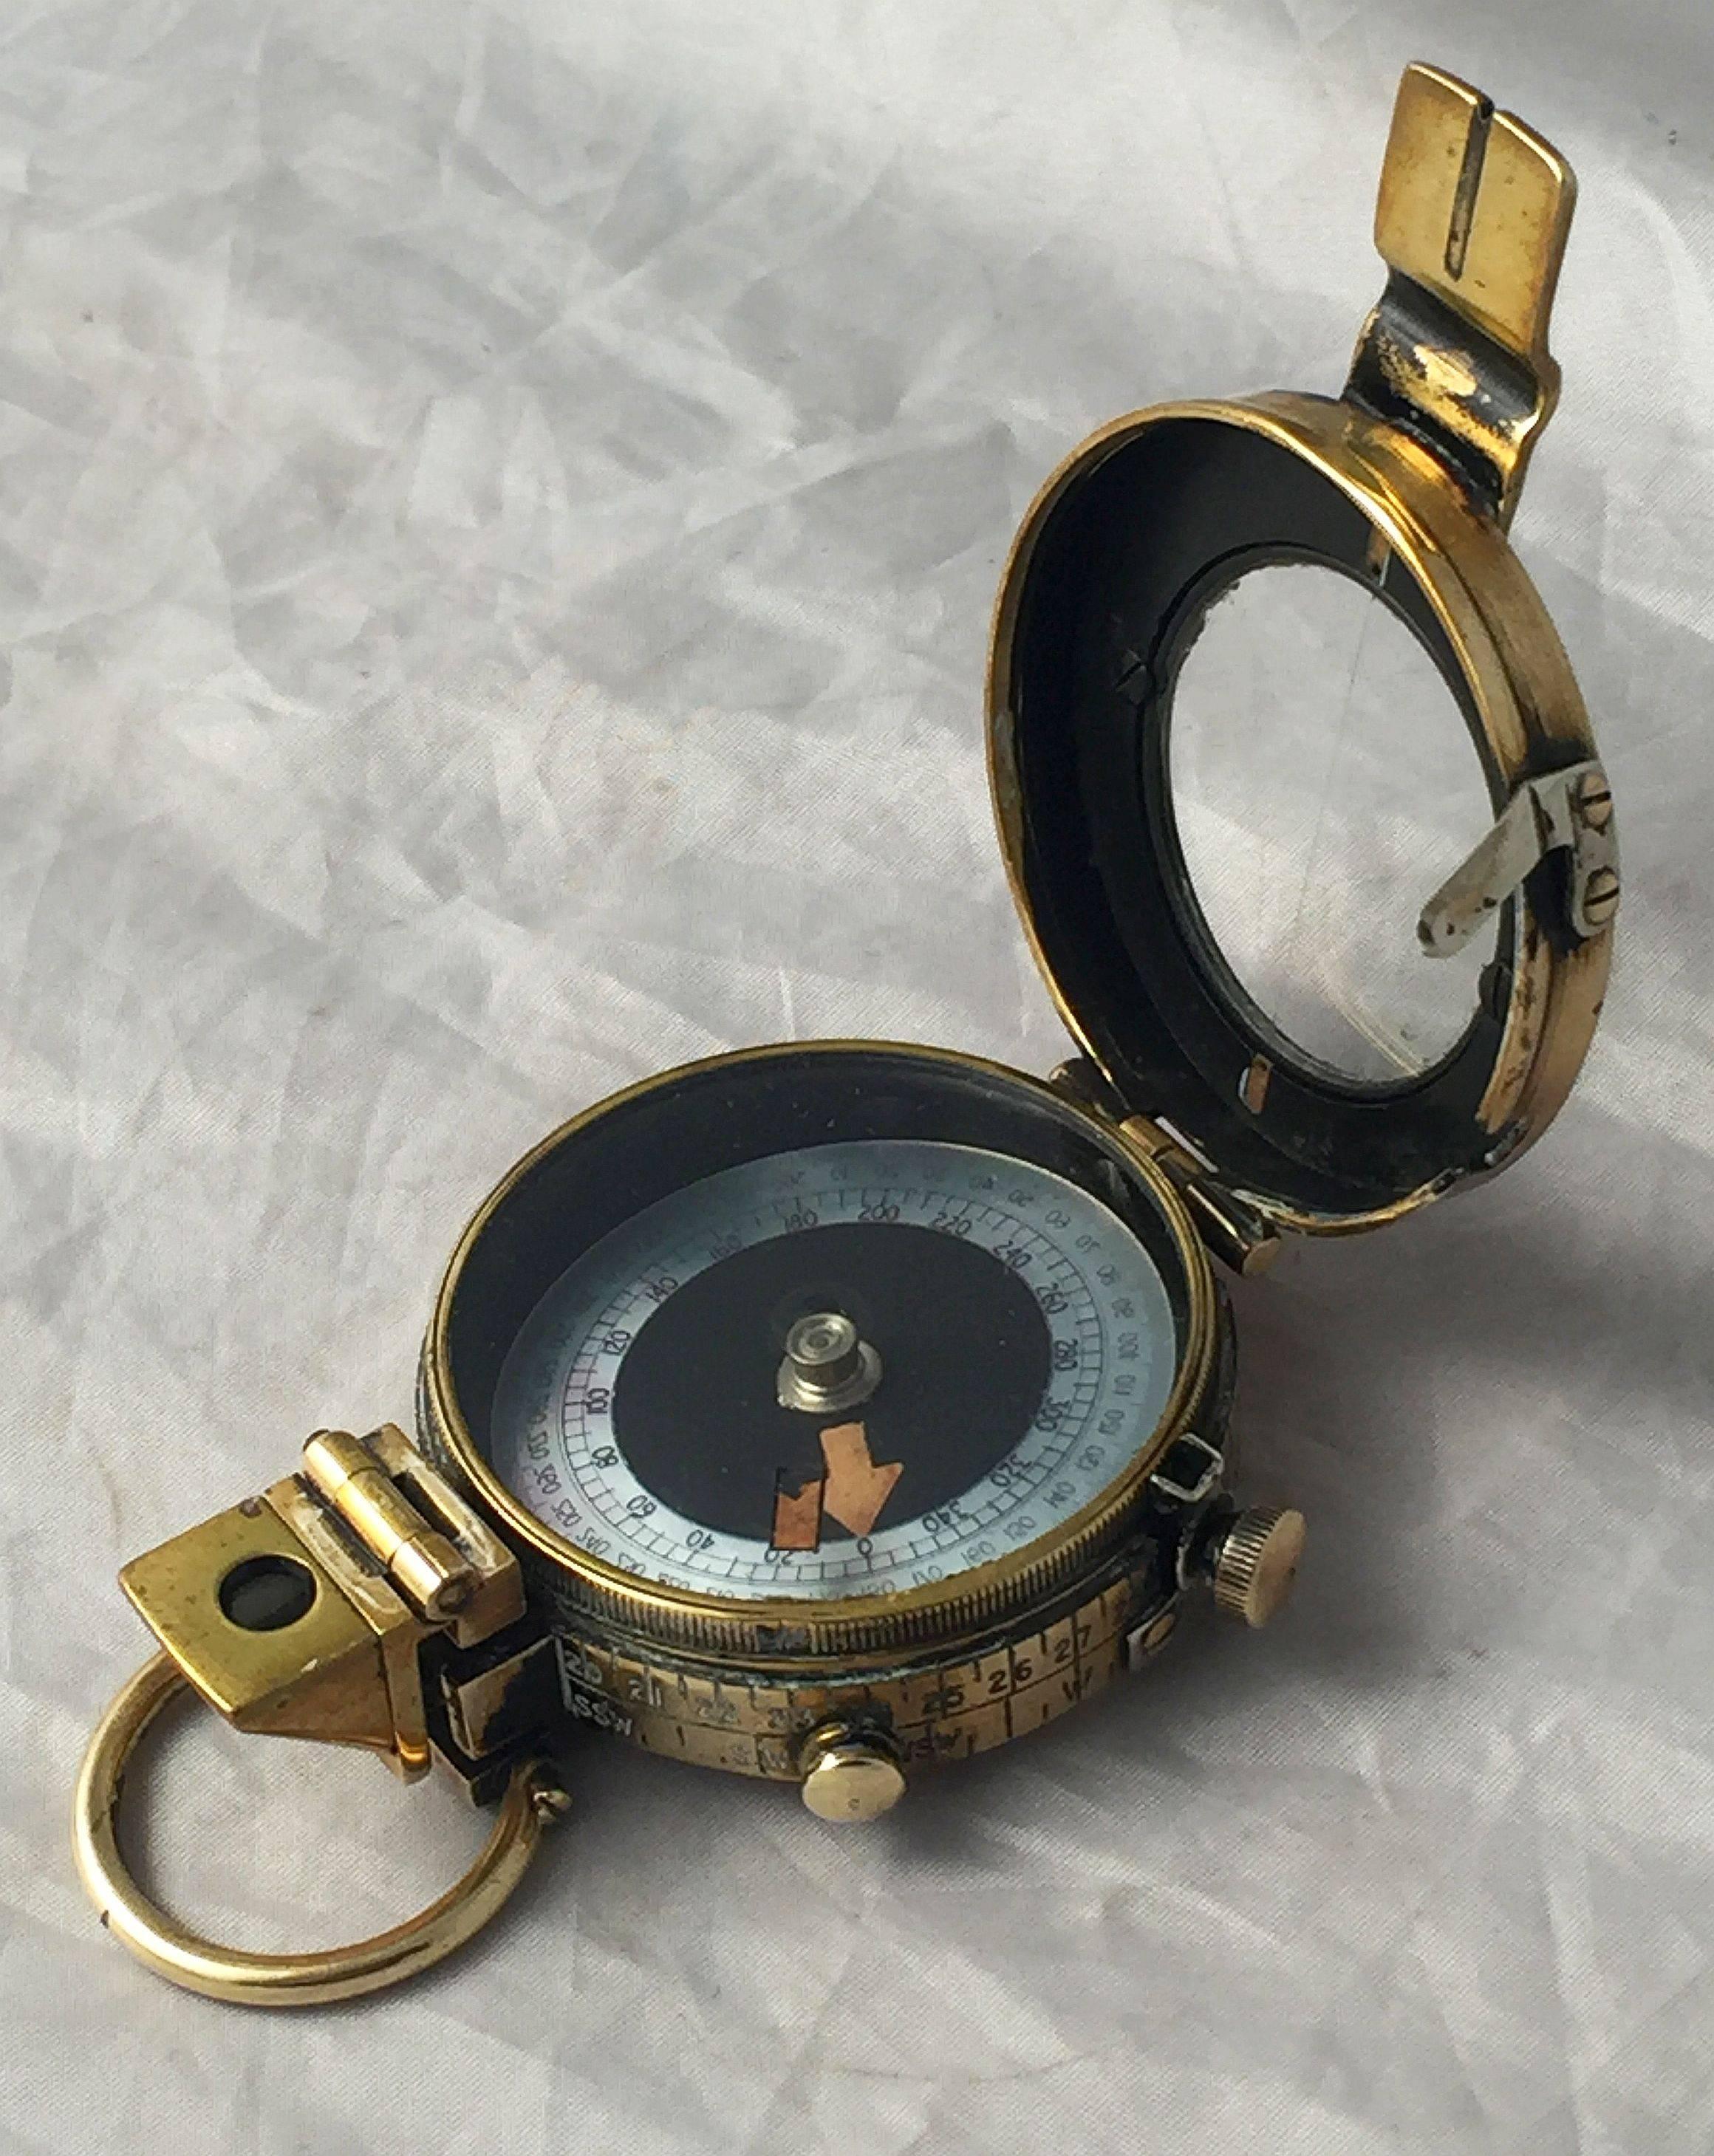 A working British military officer's marching or sighting compass of heavy brass in original leather case from World War I.

Known as a Verner's pattern Mark IX prismatic compass, with radium and mother-of-pearl dial.

Leather case with arrow